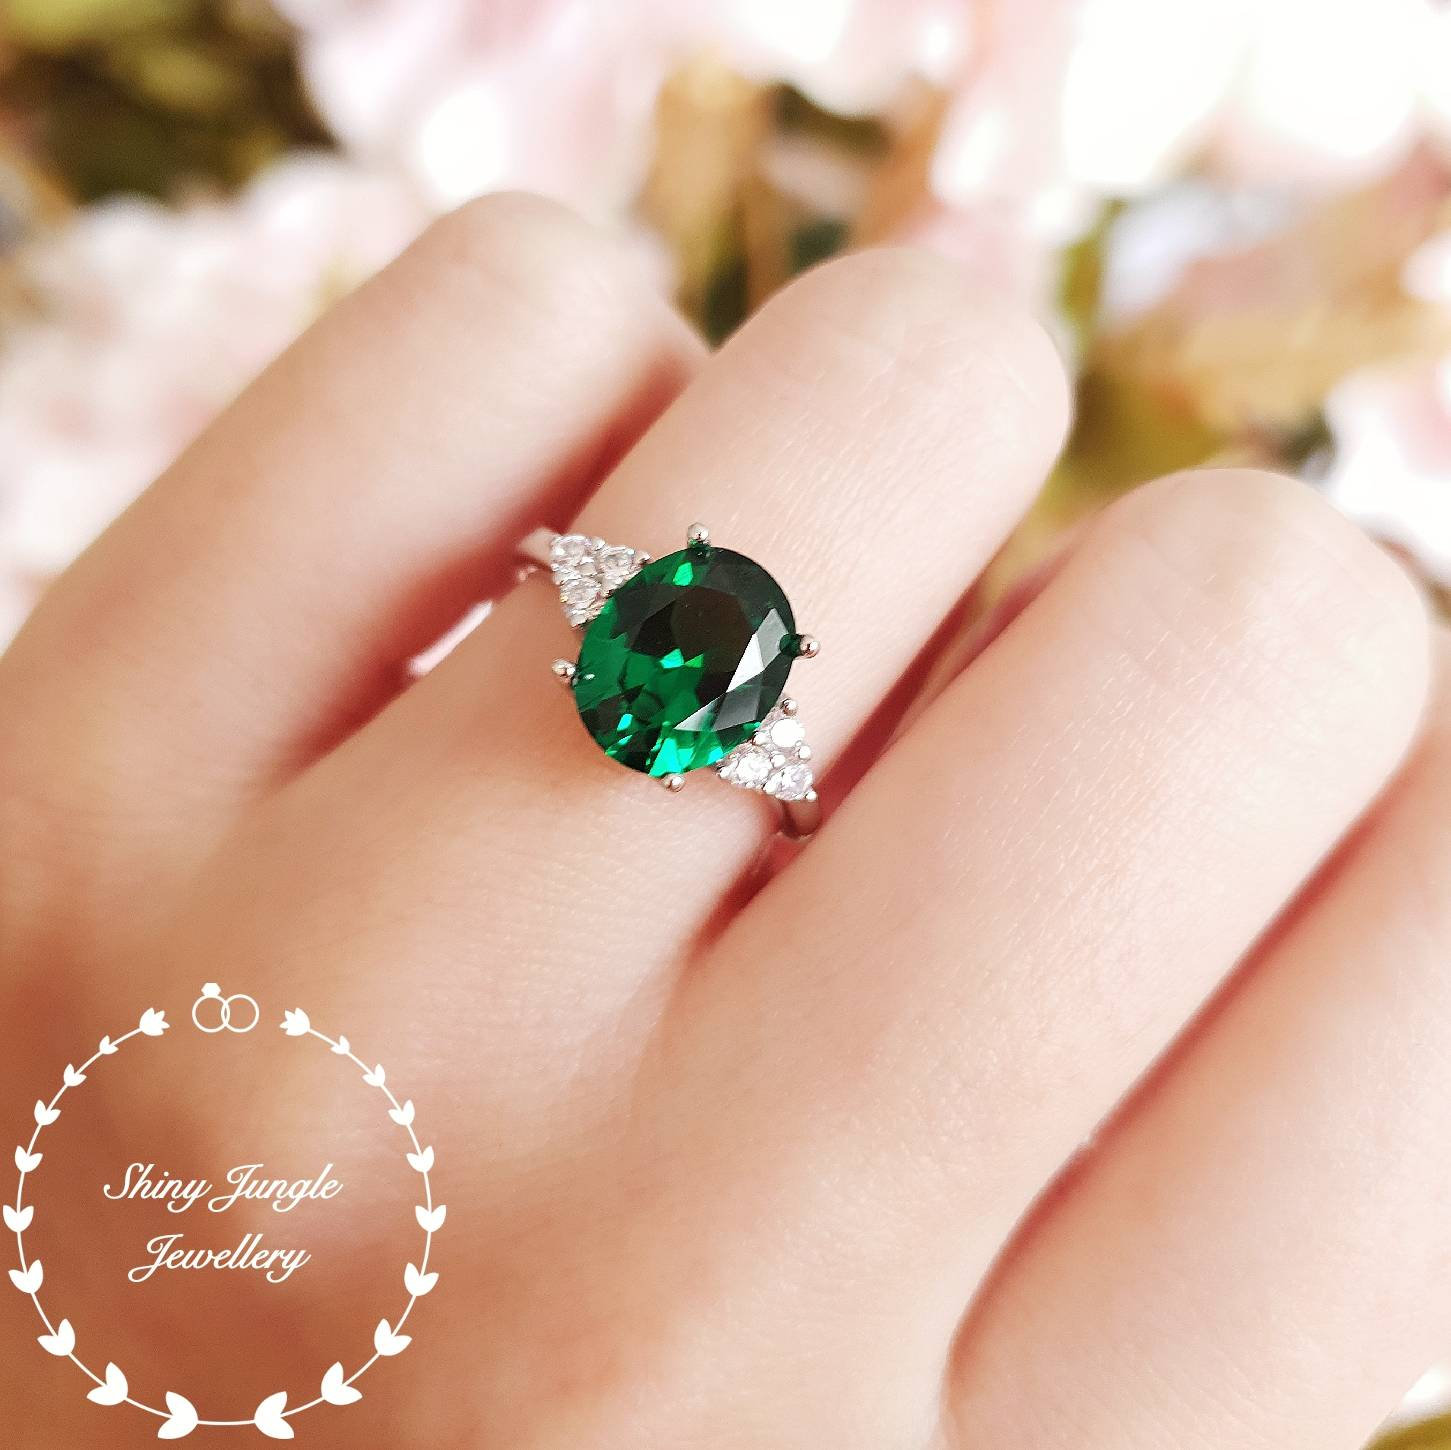 Emerald and diamond sterling silver engagement Dress ring